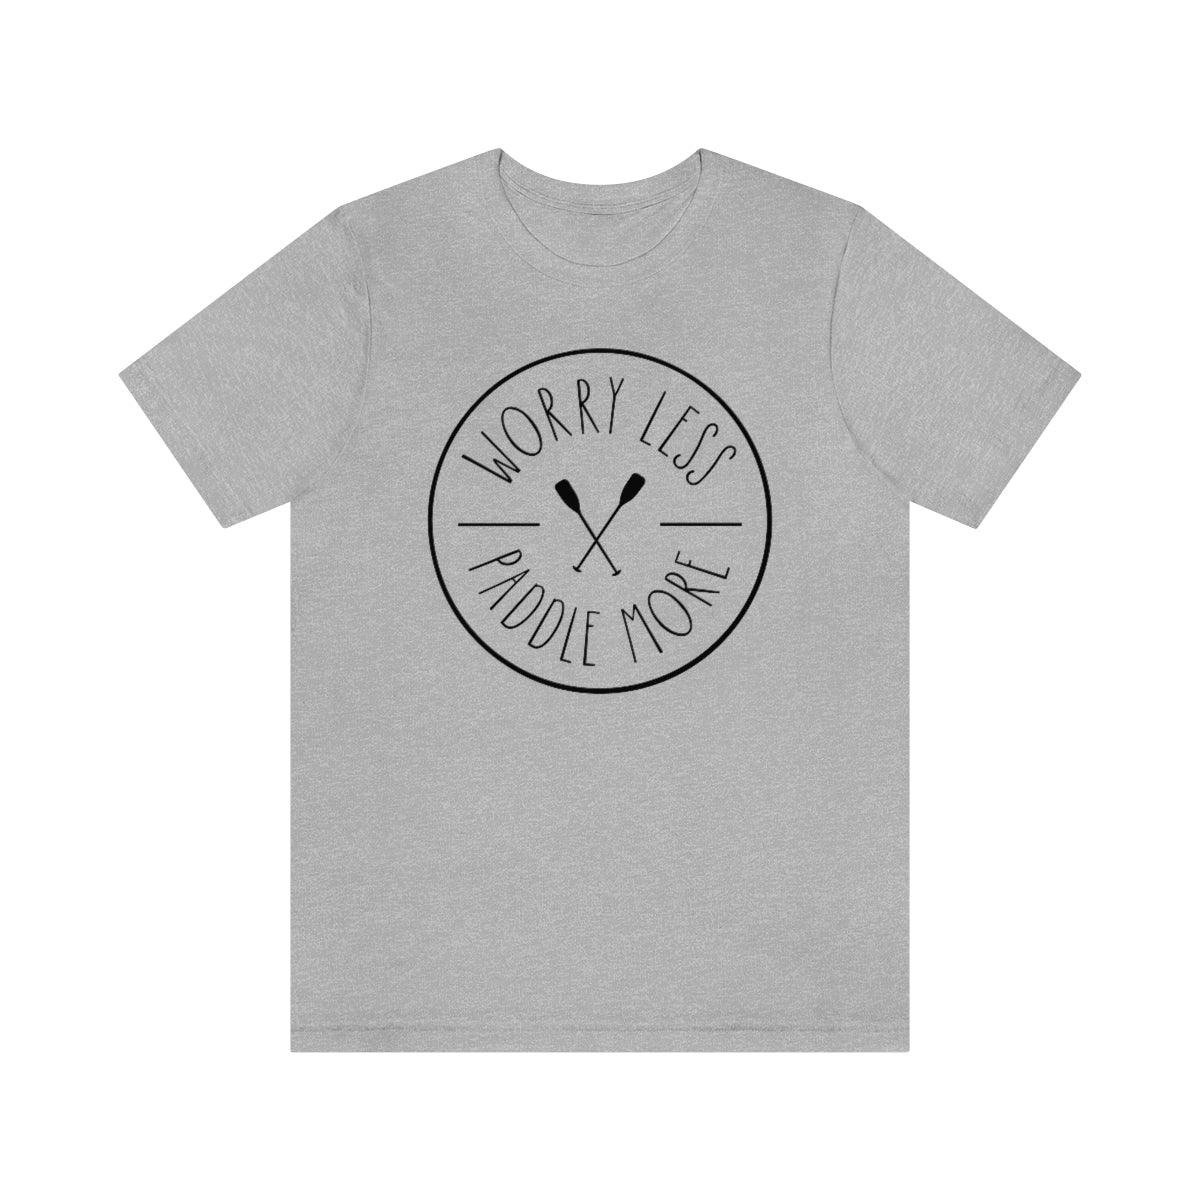 Worry Less Paddle More Short Sleeve Tee - Crystal Rose Design Co.